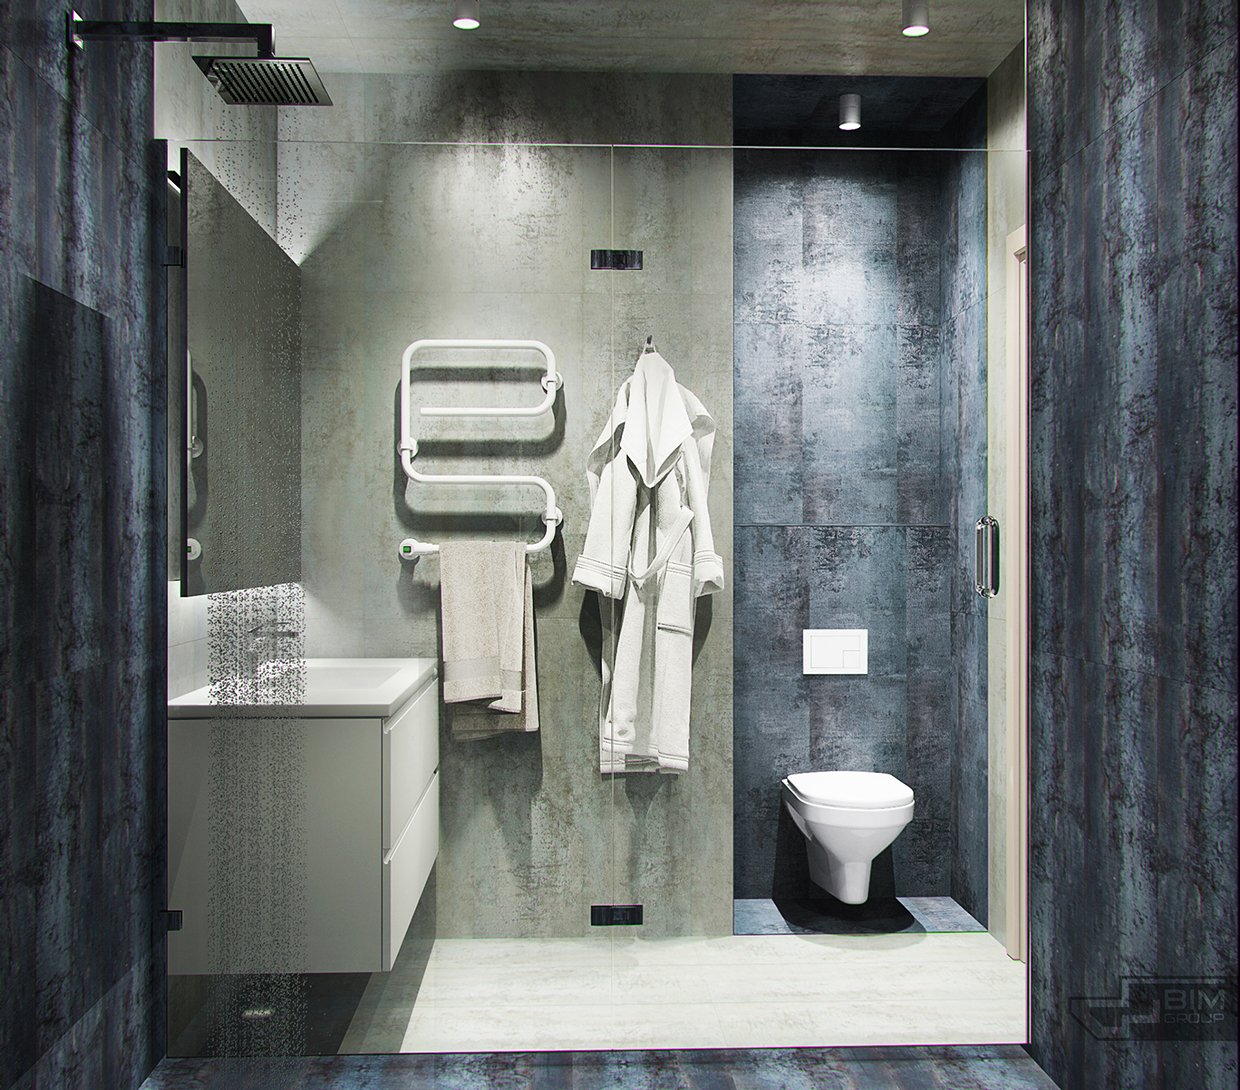 small black bathroom design "width =" 1240 "height =" 1090 "srcset =" https://mileray.com/wp-content/uploads/2020/05/1588515263_342_Small-Bathroom-Design-Ideas-With-Awesome-Decoration-Which-Looks-So.jpg 1240w, https://mileray.com / wp-content / uploads / 2016/09 / BIM-Group-300x264.jpg 300w, https://mileray.com/wp-content/uploads/2016/09/BIM-Group-768x675.jpg 768w, https: / / mileray.com/wp-content/uploads/2016/09/BIM-Group-1024x900.jpg 1024w, https://mileray.com/wp-content/uploads/2016/09/BIM-Group-696x612.jpg 696w, https://mileray.com/wp-content/uploads/2016/09/BIM-Group-1068x939.jpg 1068w, https://mileray.com/wp-content/uploads/2016/09/BIM-Group- 478x420 .jpg 478w "sizes =" (maximum width: 1240px) 100vw, 1240px